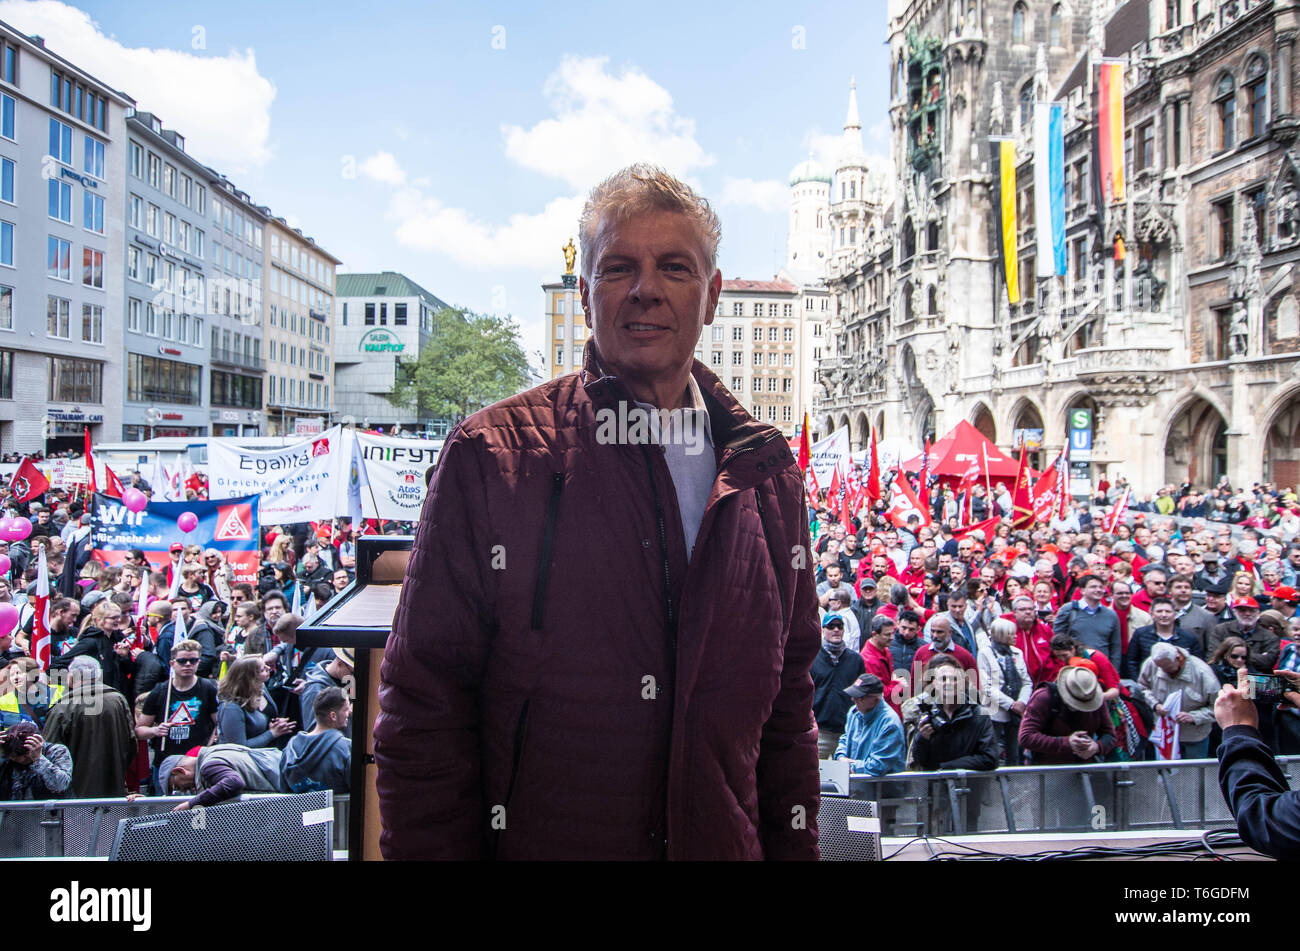 Munich, Bavaria, Germany. 1st May, 2019. Demonstrating under the motto of 'Europa. Jetzt aber richtig!'', thousands of German workers took the streets of Munich, Germany for May Day in support of European solidarity and workers' rights. Organized by the DGB coalition of unions, the group marched from the DGB Haus to Marienplatz where a full day of speakers and performances were planned. Credit: Sachelle Babbar/ZUMA Wire/Alamy Live News Stock Photo